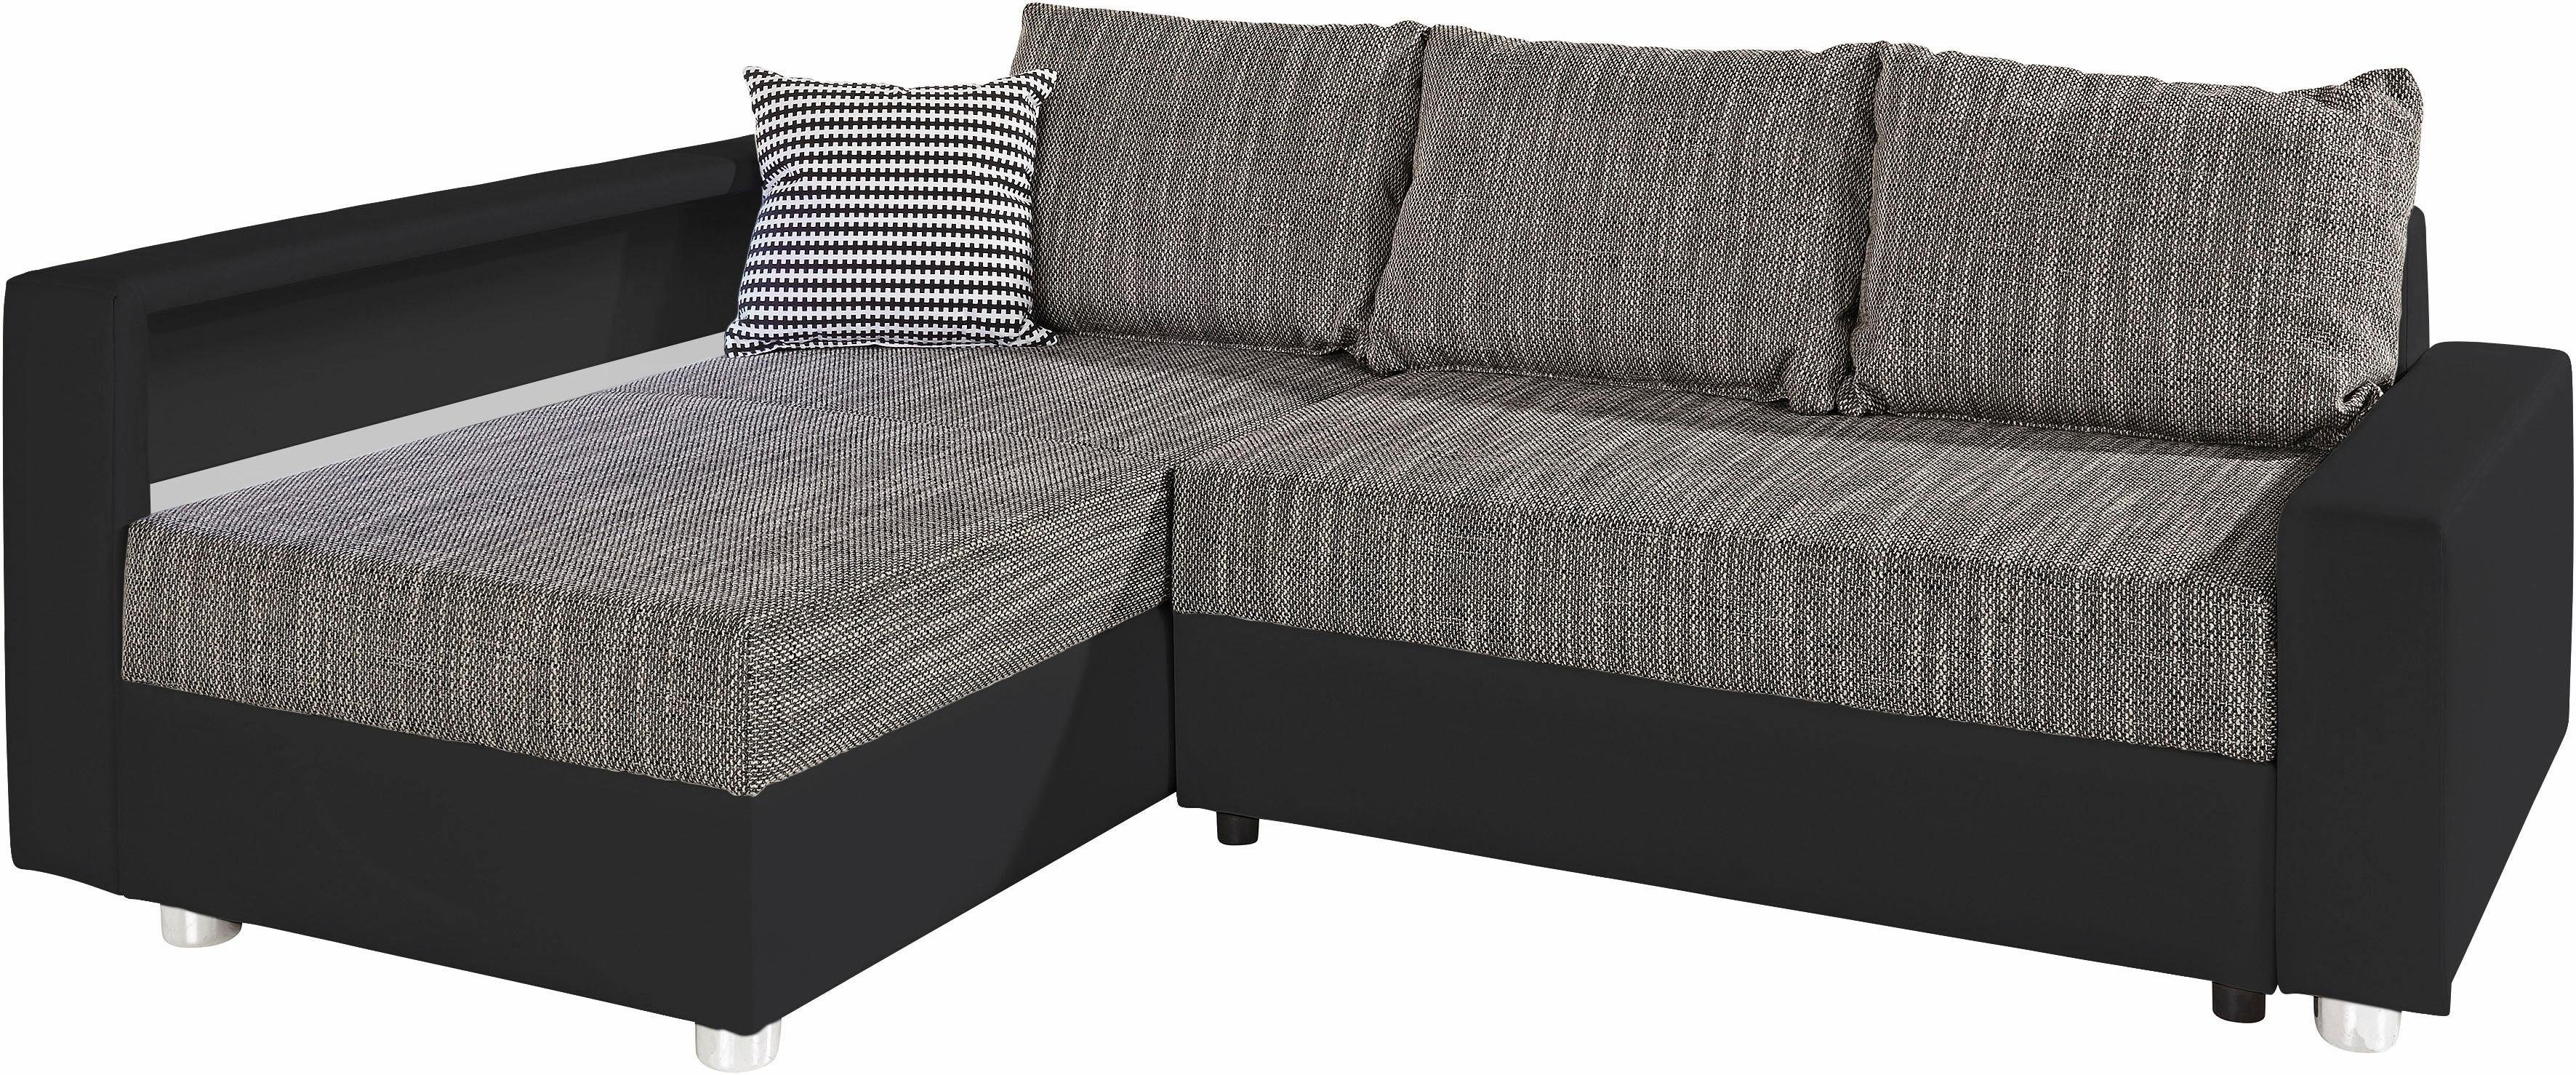 Bettfunktion, AB Ecksofa inklusive COLLECTION RGB-LED-Beleuchtung wahlweise Relax, mit Federkern,